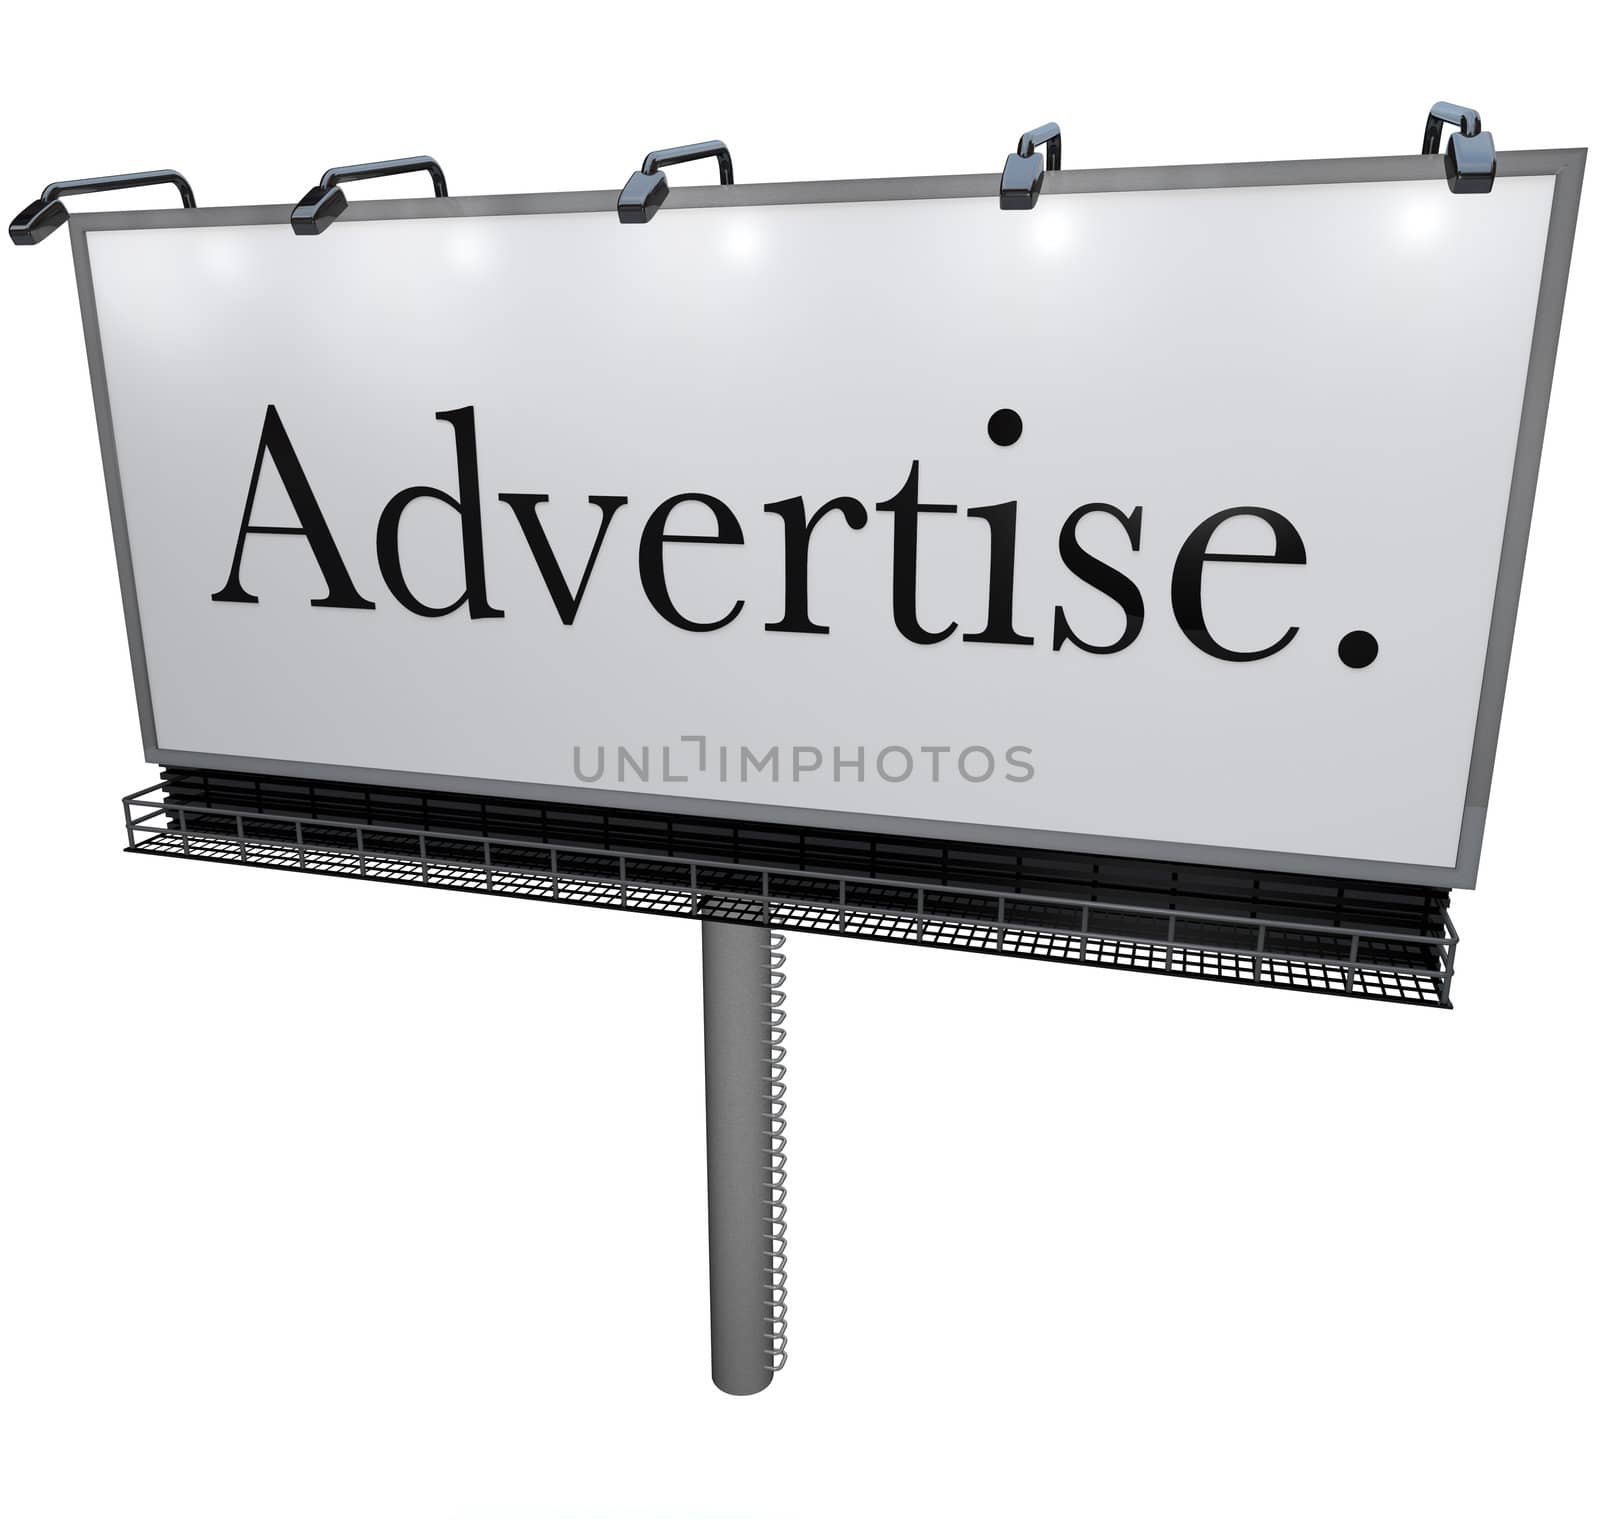 An outdoor billboard with the word Advertise on it, representing the power of advertising to communicate your business and attract more customers